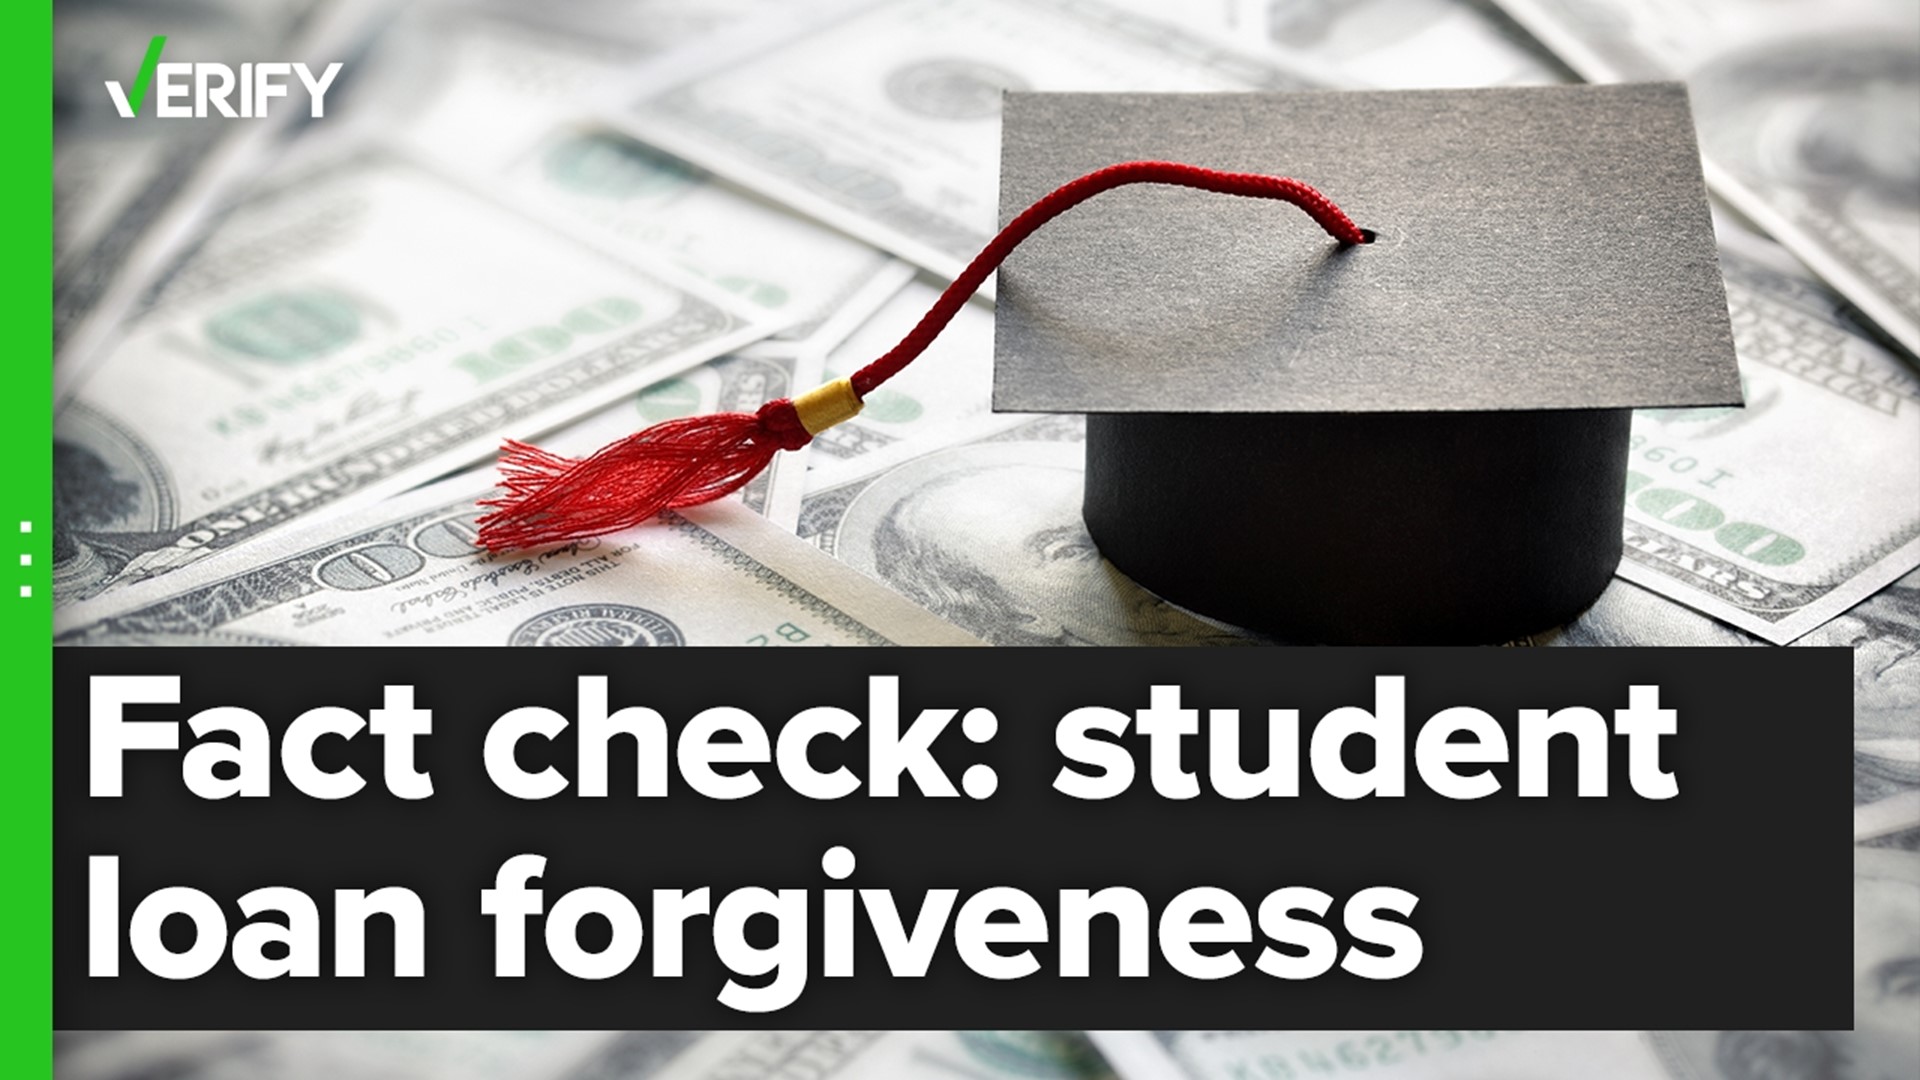 When did the student loan repayment pause start, and what does it do?  The VERIFY team tackles students’ big questions on loan forgiveness.